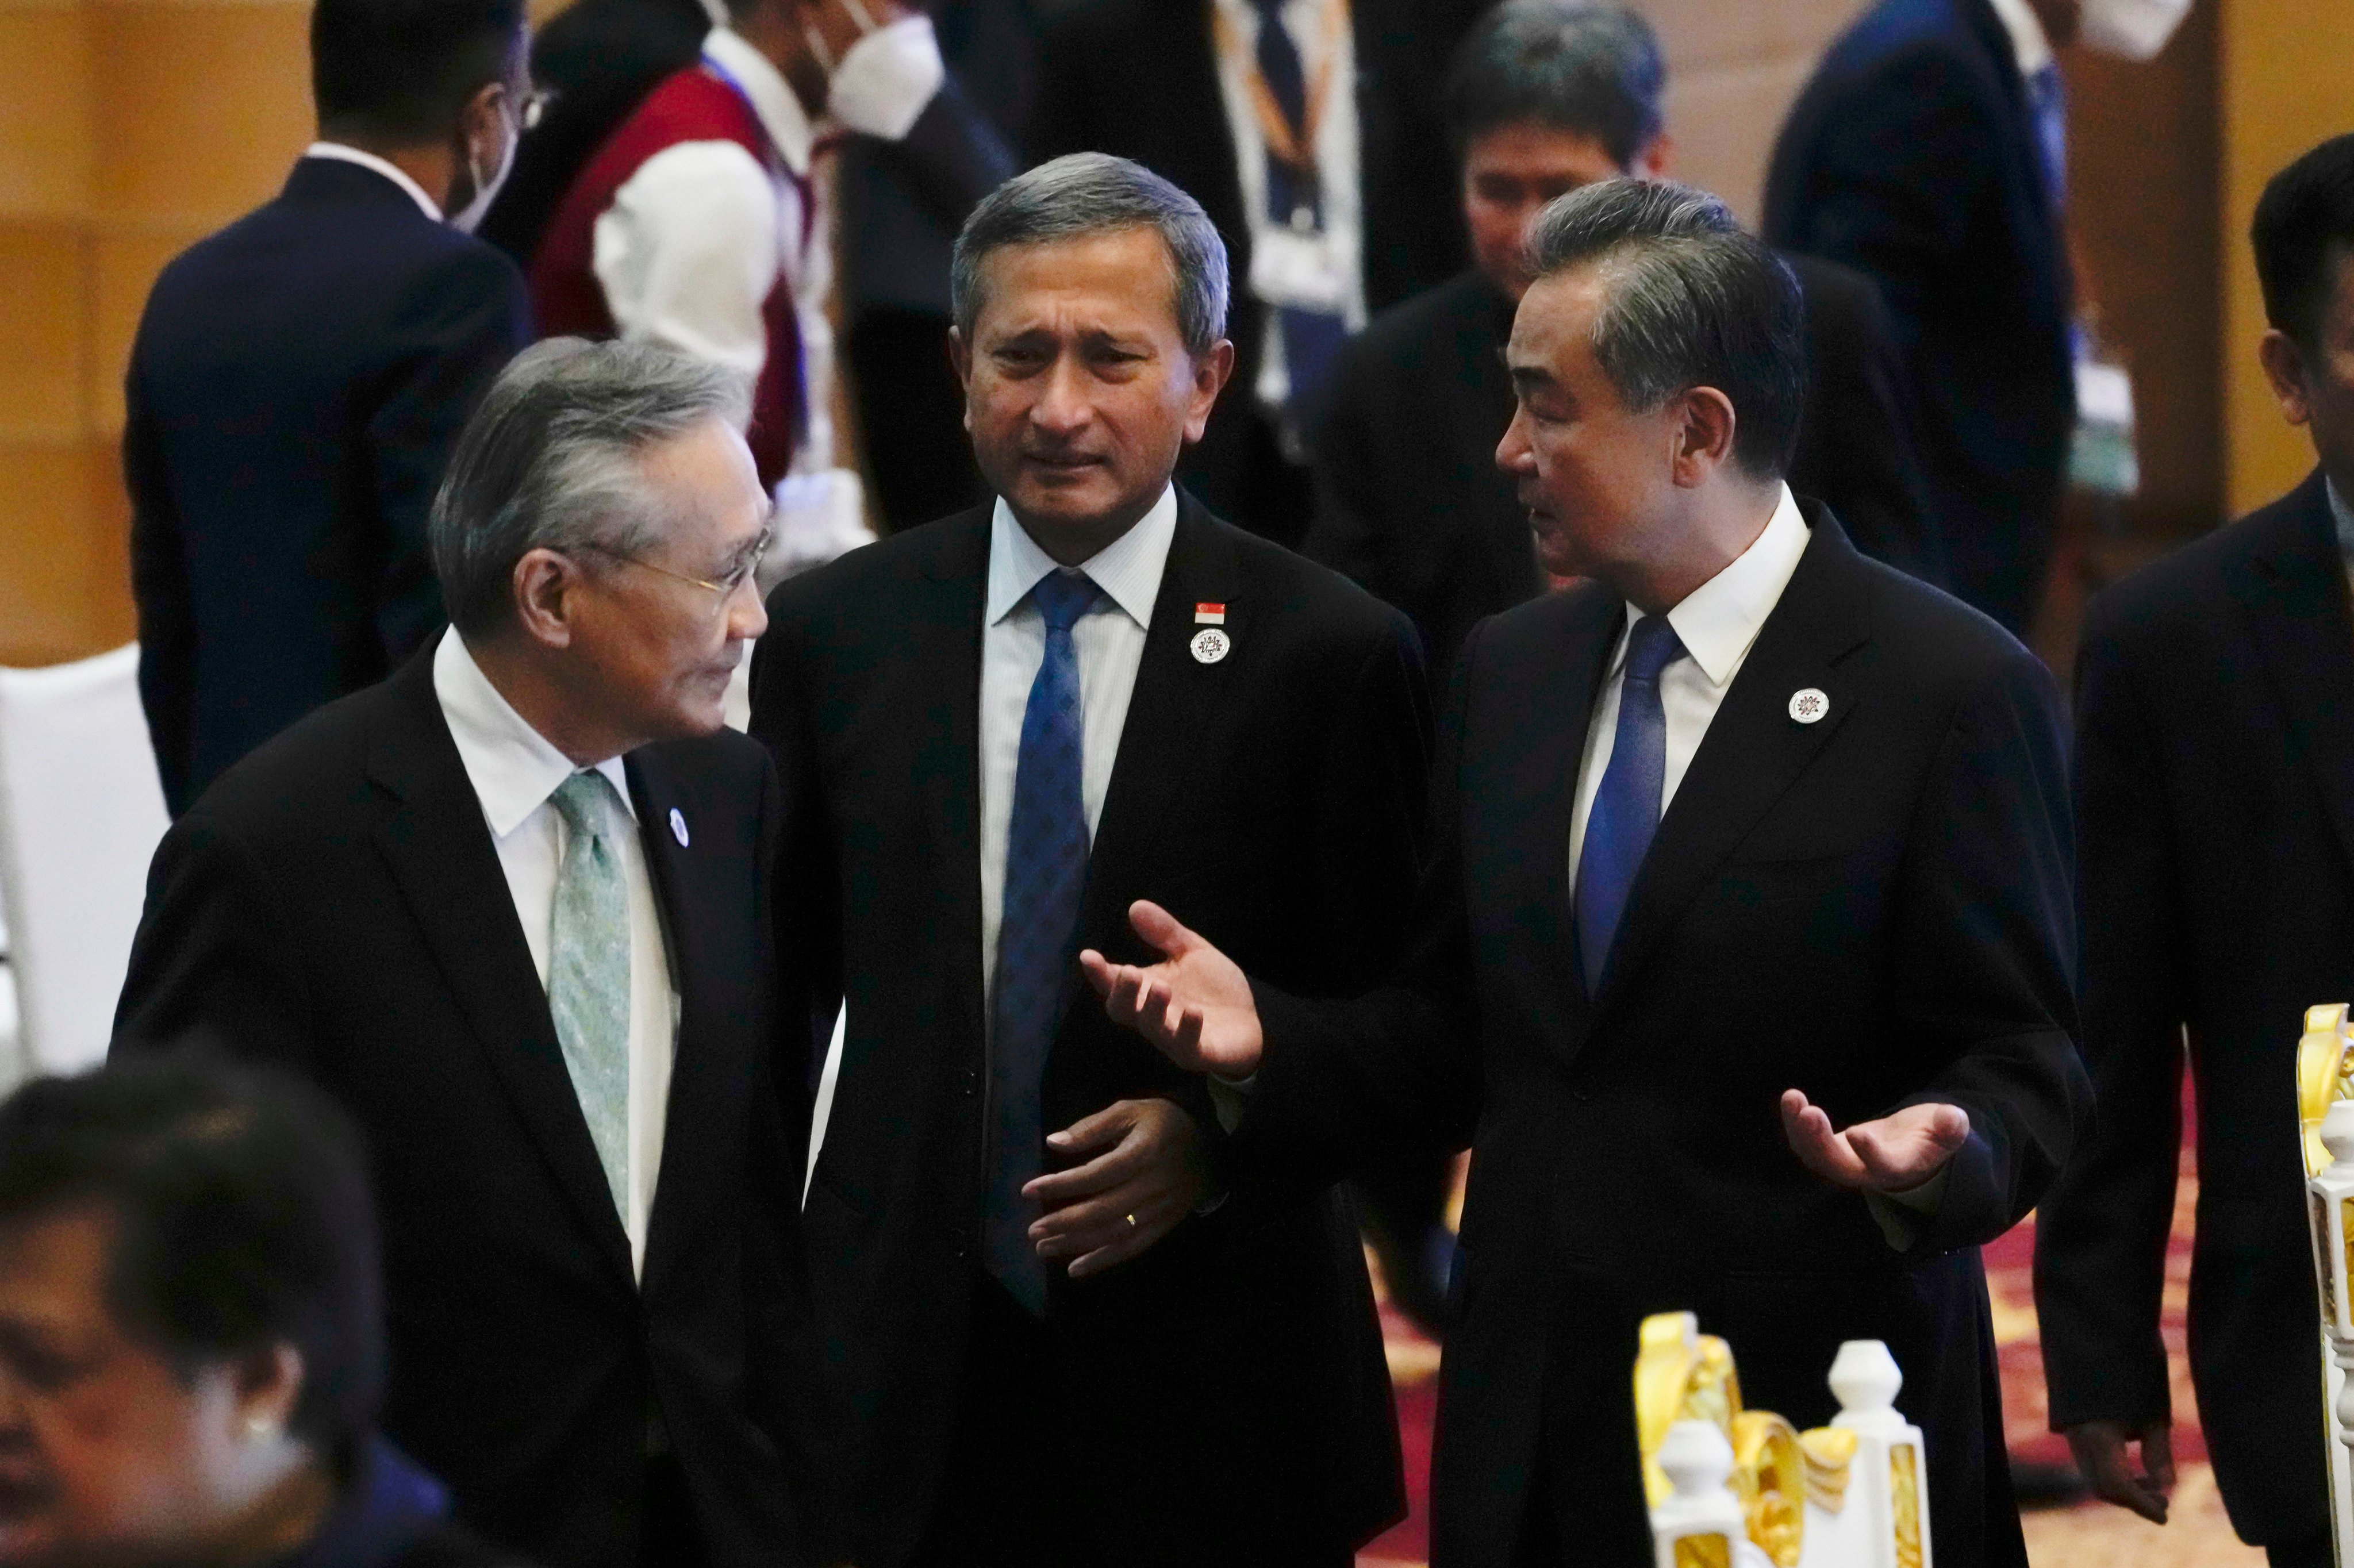 Foreign Minister Wang Yi (right) chats with Singapore’s Foreign Minister Vivian Balakrishnan (centre) and Thailand’s Foreign Minister Don Pramudwinai as they arrive at the Asean-China Ministerial Meeting at a hotel in Phnom Penh, Cambodia, on August 4. Photo: AP